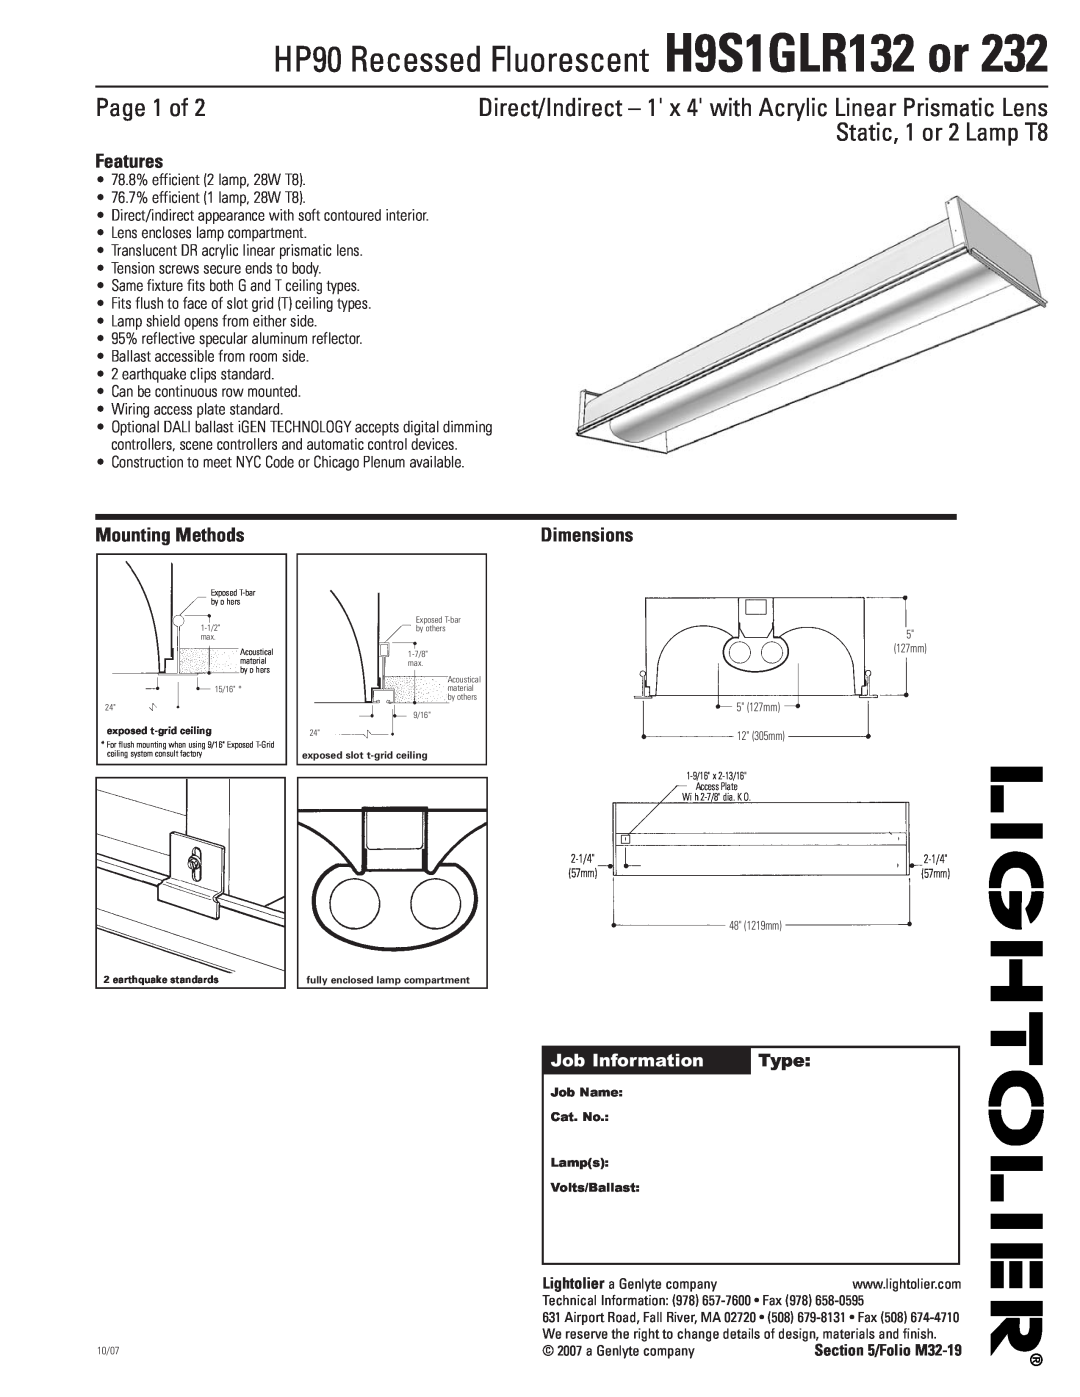 Lightolier H9S1GLR232 dimensions Page 1 of, Static, 1 or 2 Lamp T8, Features, Mounting Methods, Dimensions, Type 